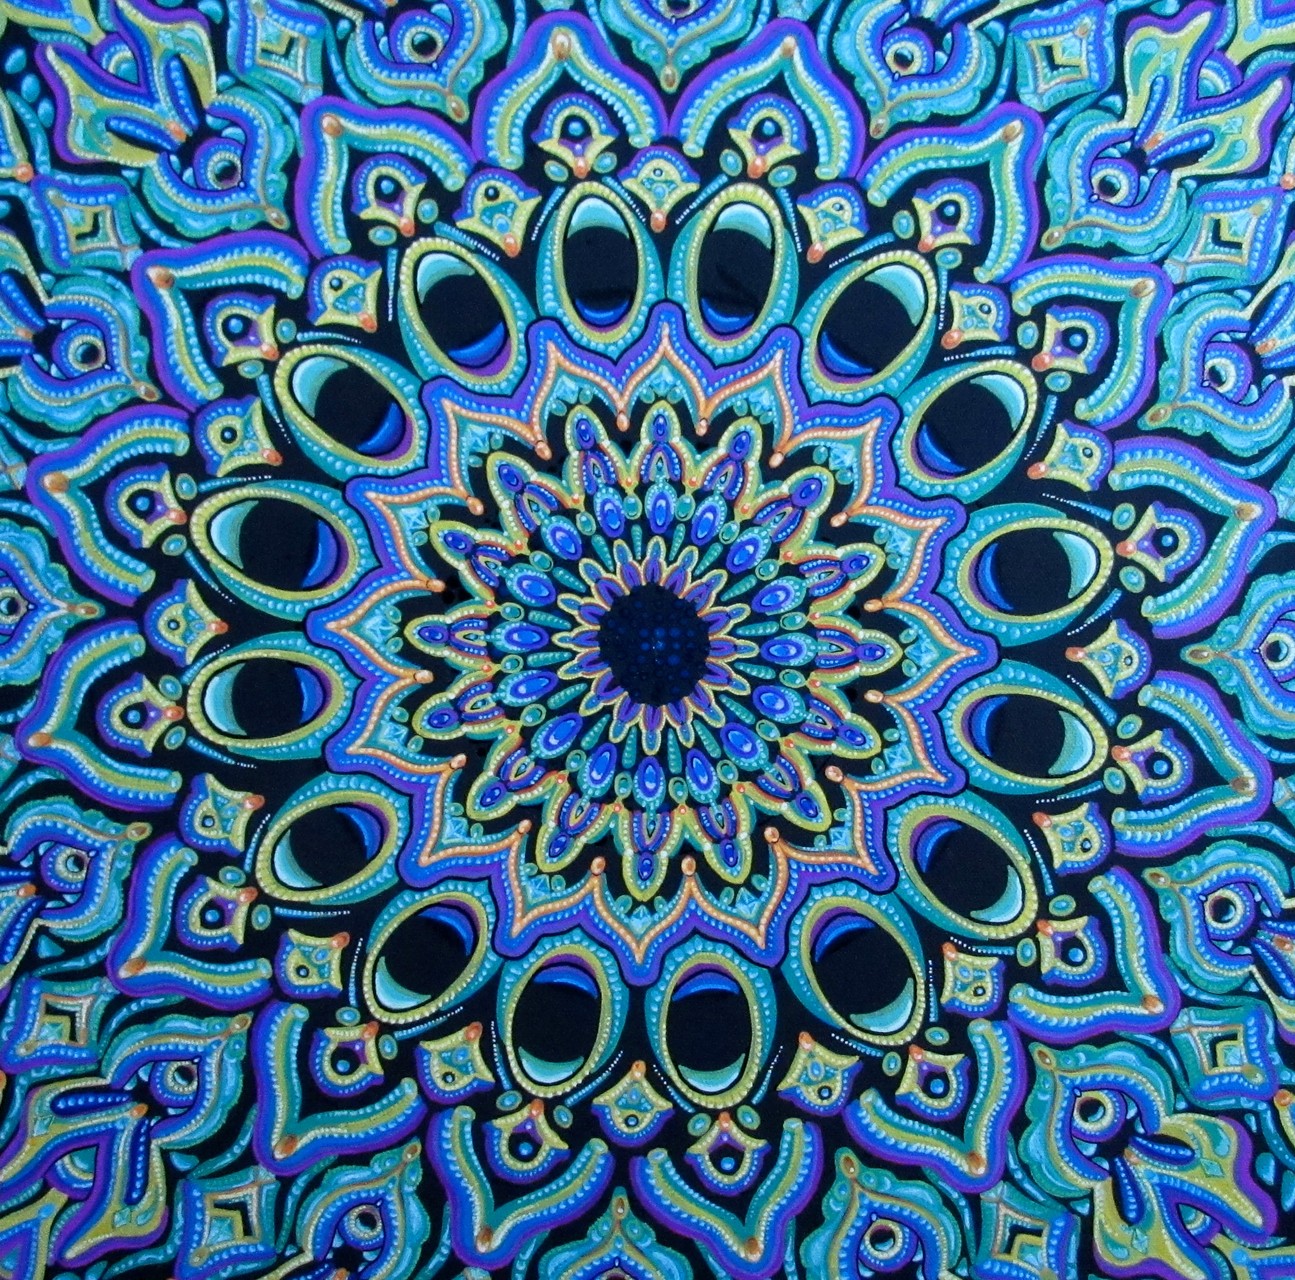 SOLD 4/16 - #345 - "Peacock Mandala", oil paint markers on canvas 16x16, 10/15 - Insp. by Michael Garfield